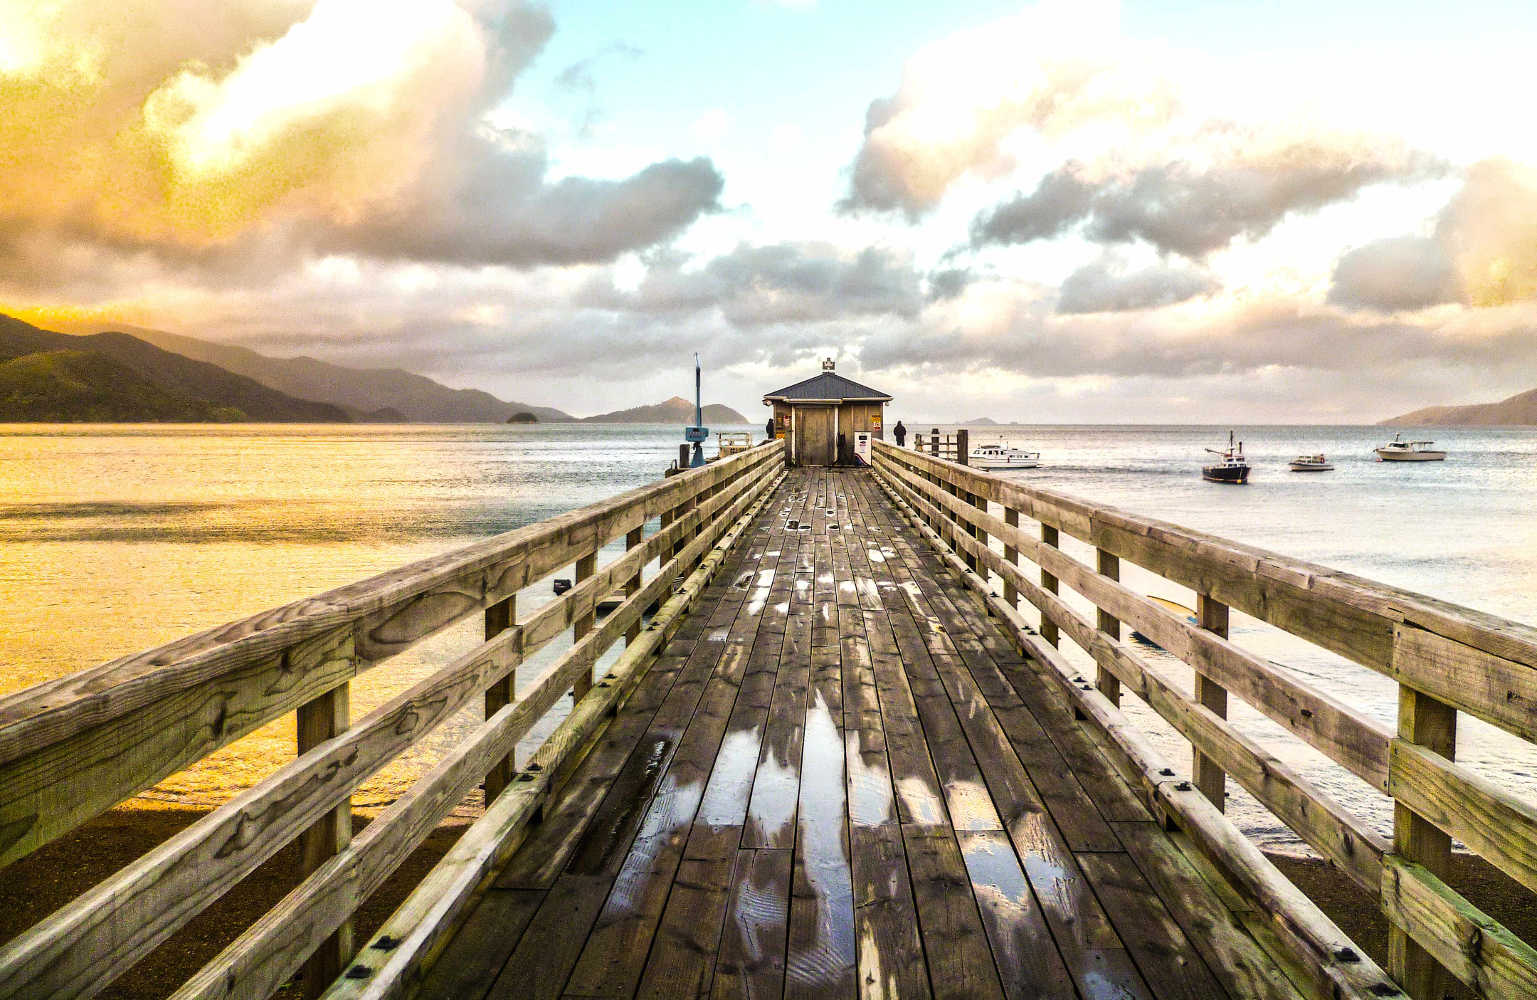 Wooden pier during the sunset in French Pass, Marlborough Sounds, New Zealand